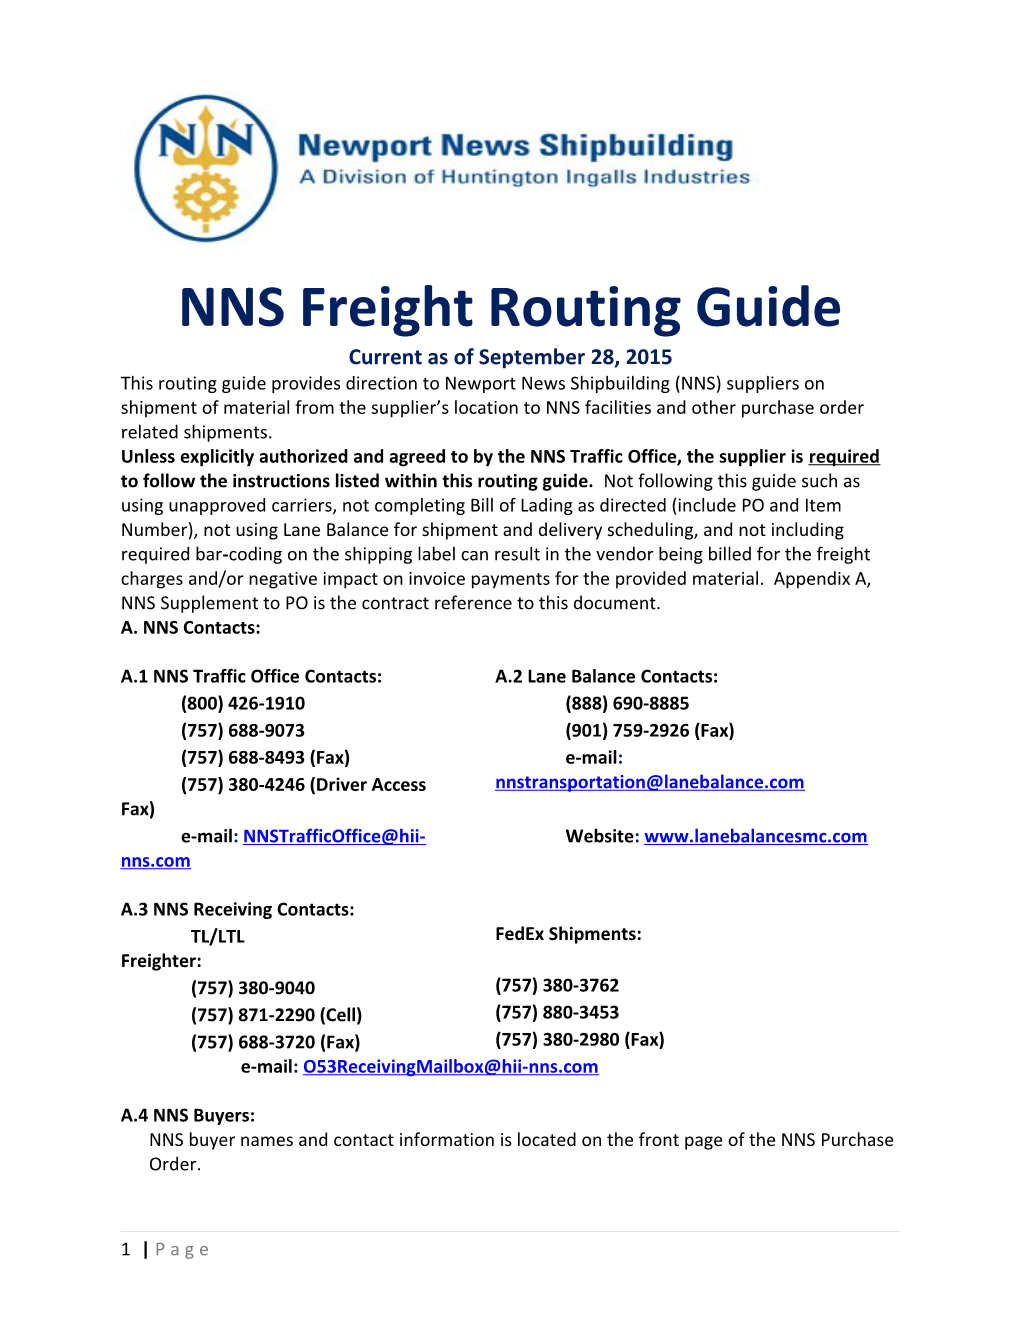 NNS Freight Routing Guide